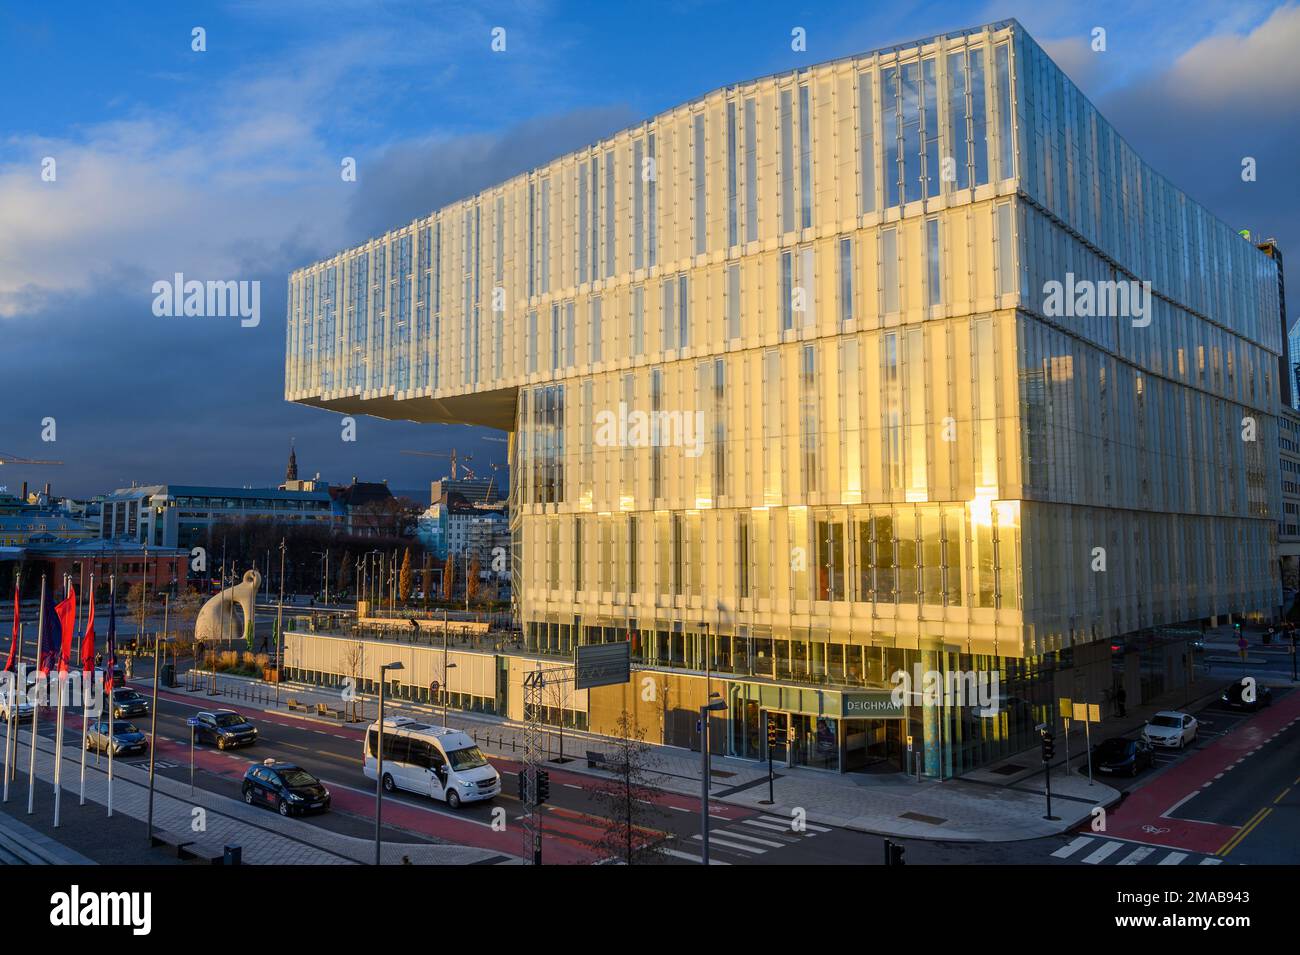 The exterior of Deichman Bjørvika, the municipal public library in Oslo city centre, Norway. Stock Photo